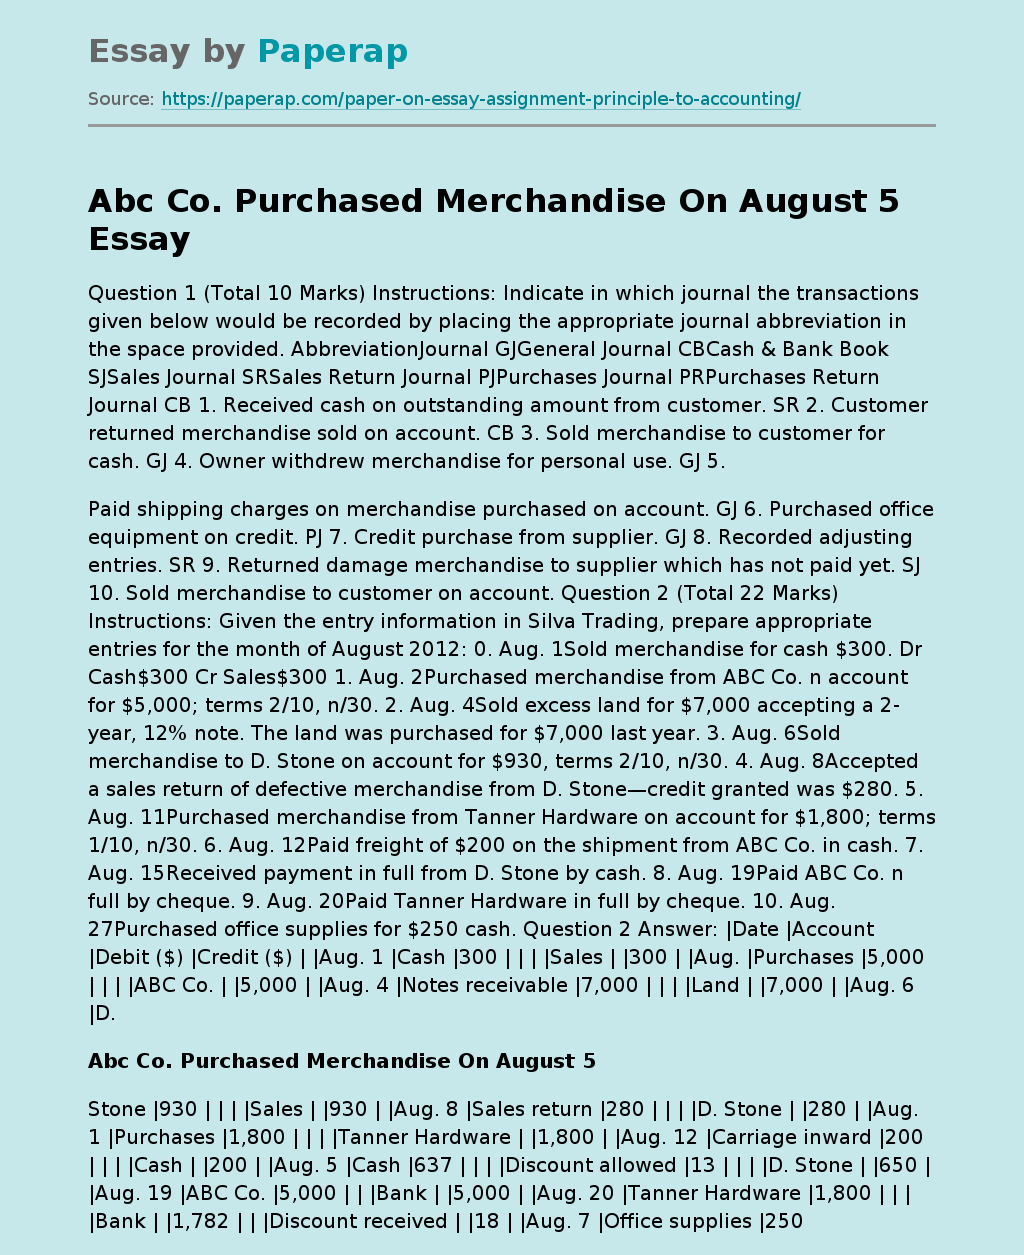 Abc Co. Purchased Merchandise On August 5